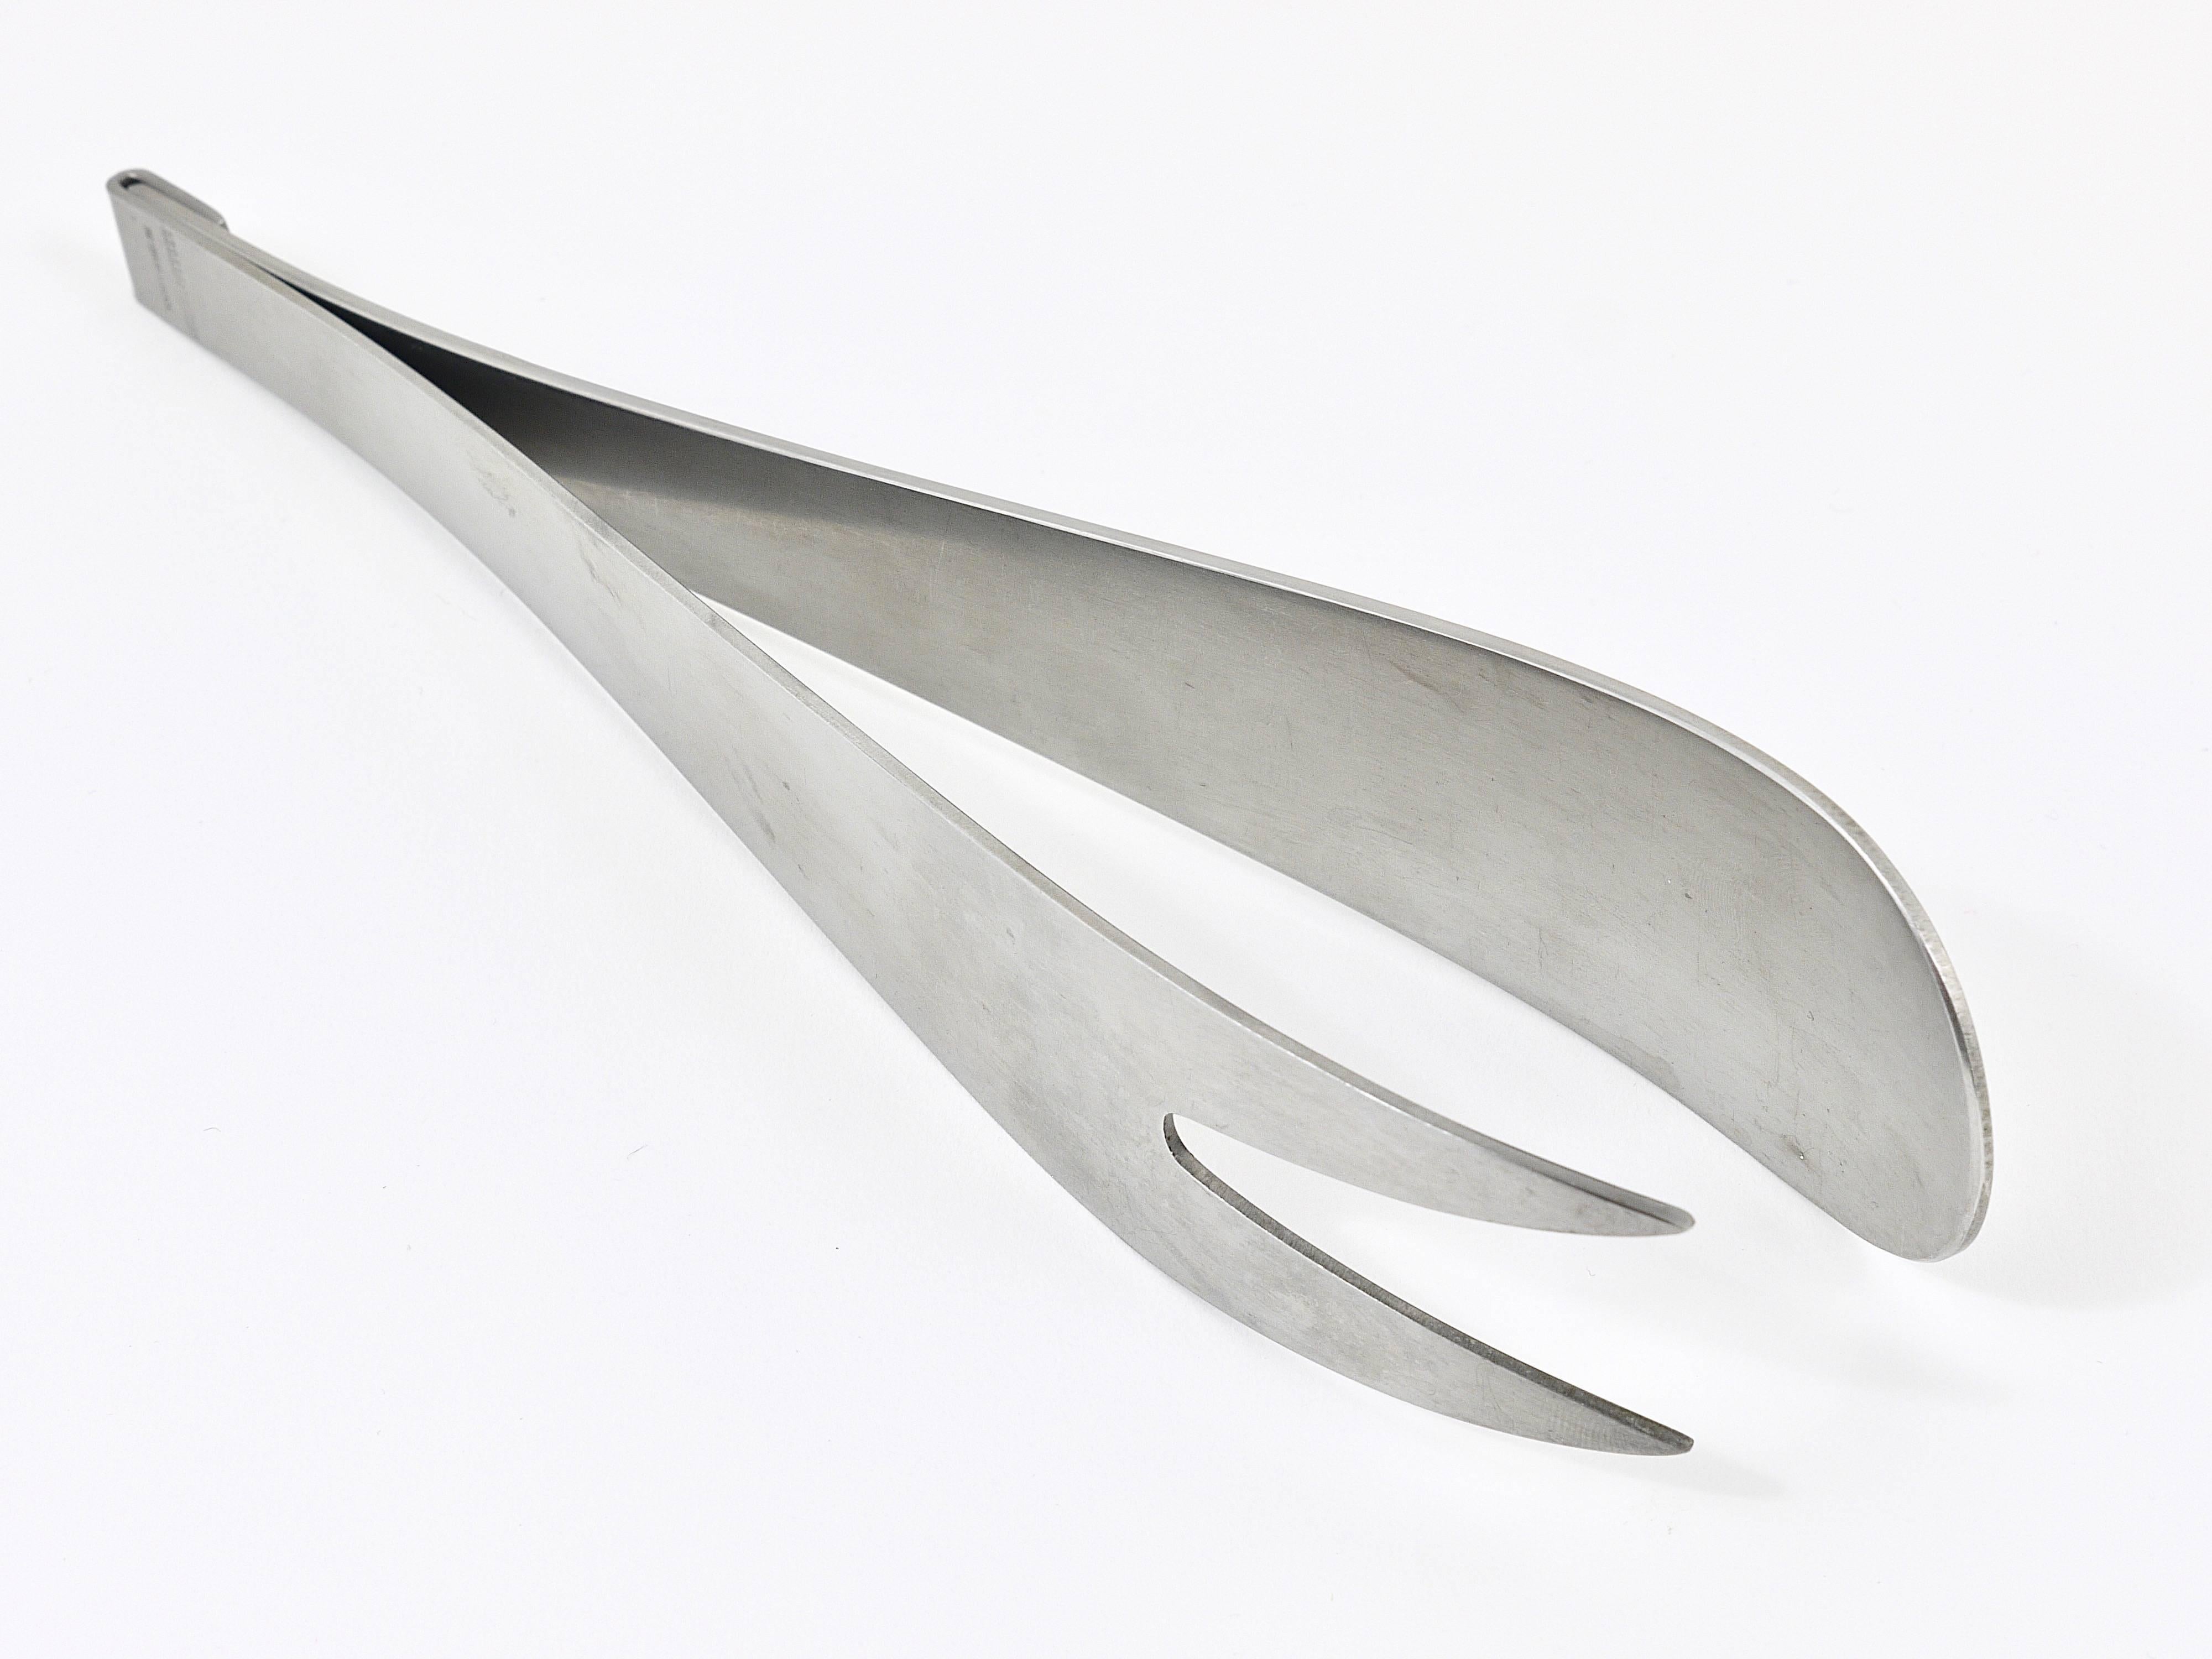 A beautiful pair of salad servers from the 1960s, consisting of a large fork and a spoon, which can be also used as tongs. Designed by Carl Aubock, executed by Amboss Austria. Made of stainless steel, fully marked, in very good condition.